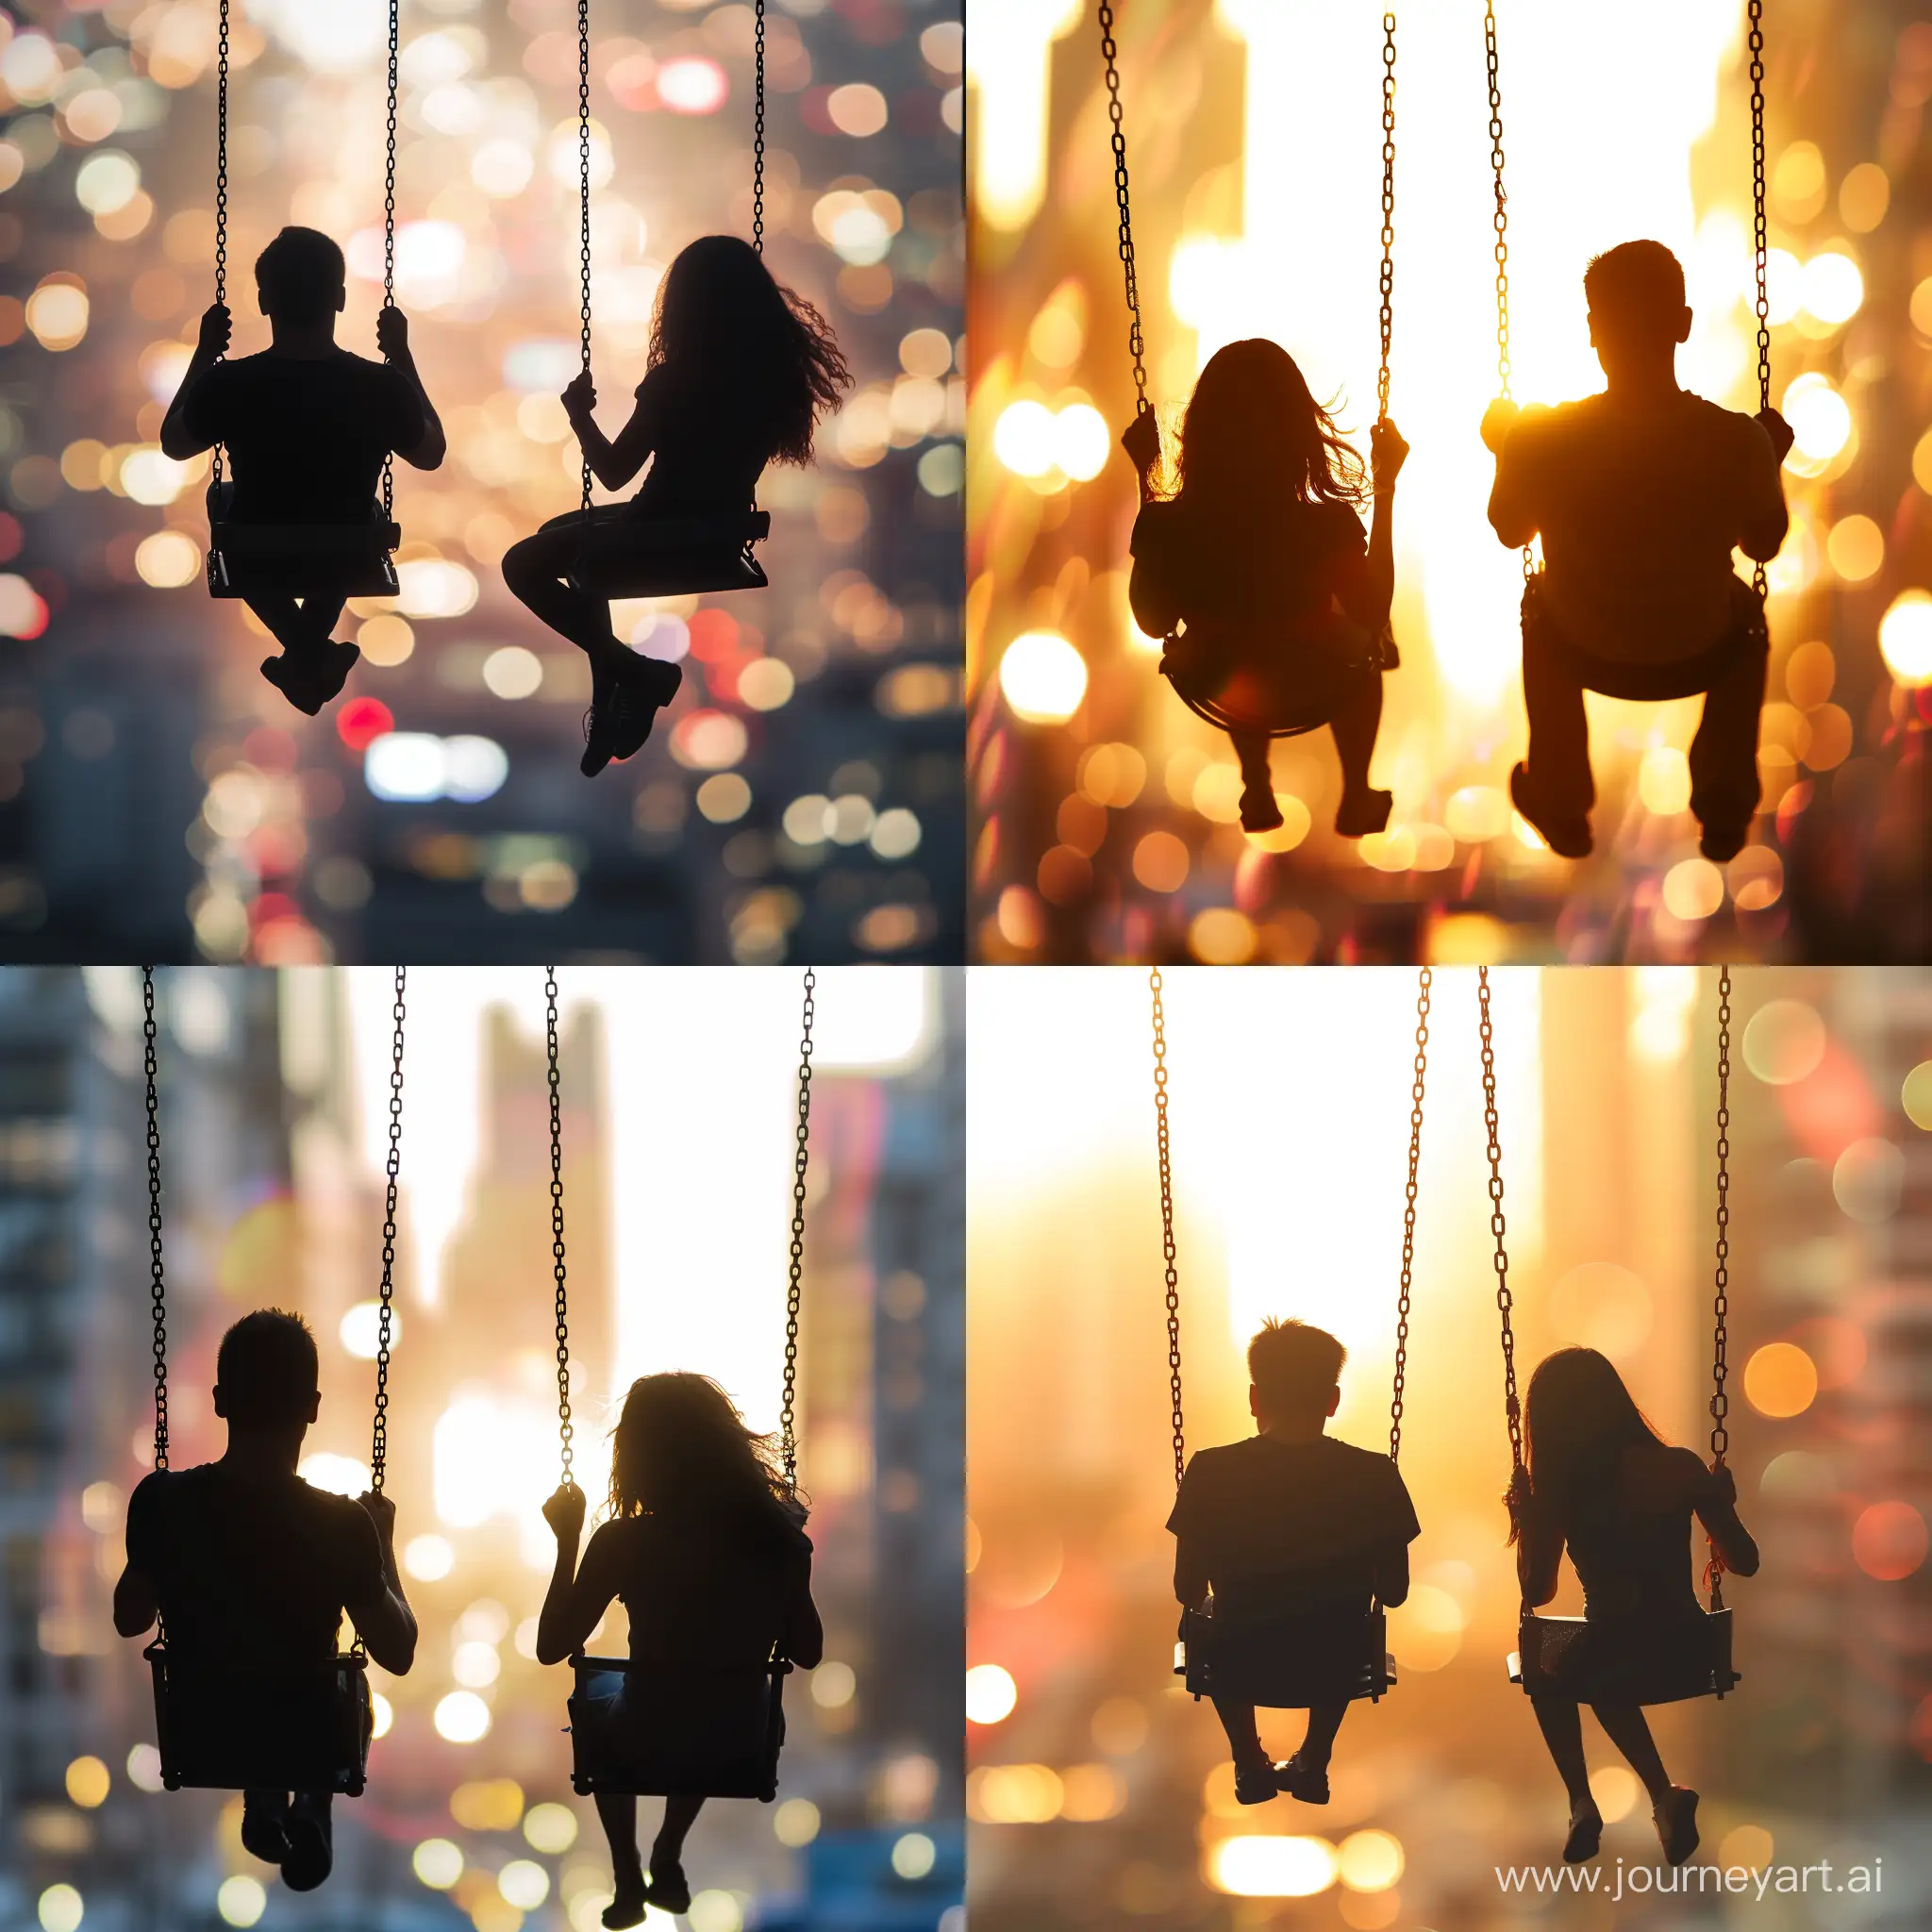 Urban-Romance-Silhouetted-Couple-on-Swings-in-Cityscape